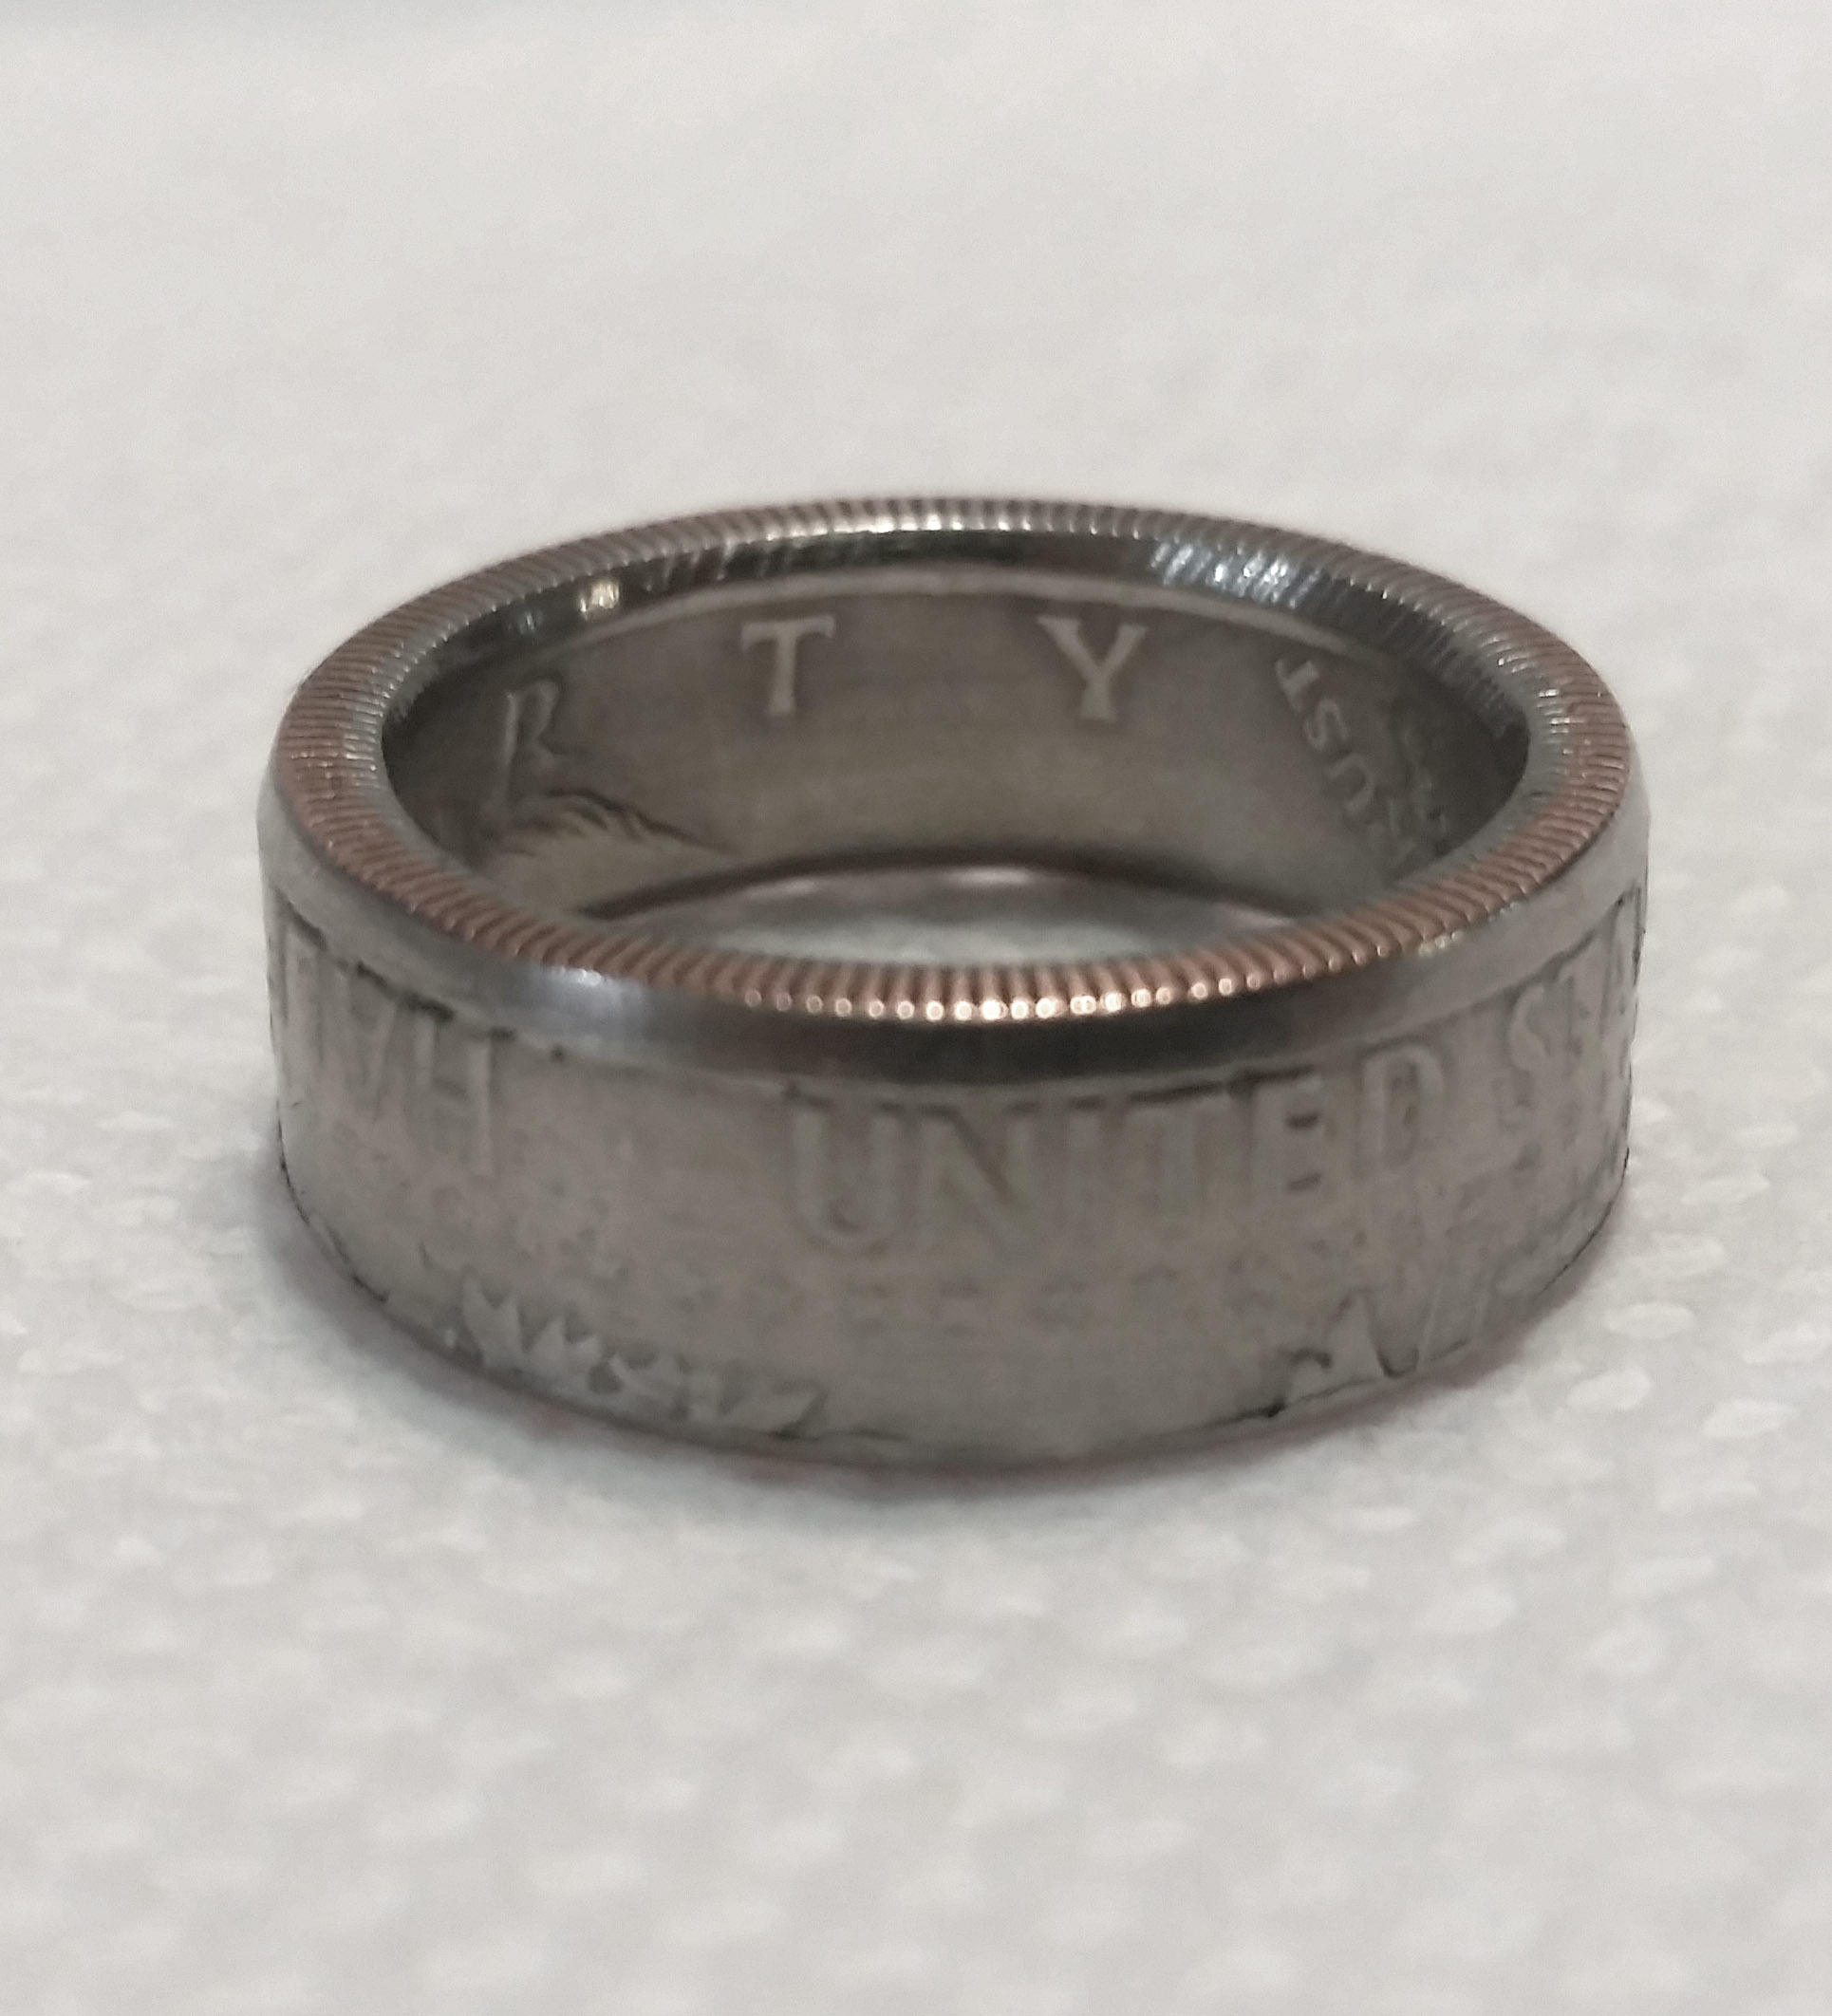 Mans Gift Copper=Nickel coin ring Ike dollar coin jewelry year 1972 size 11